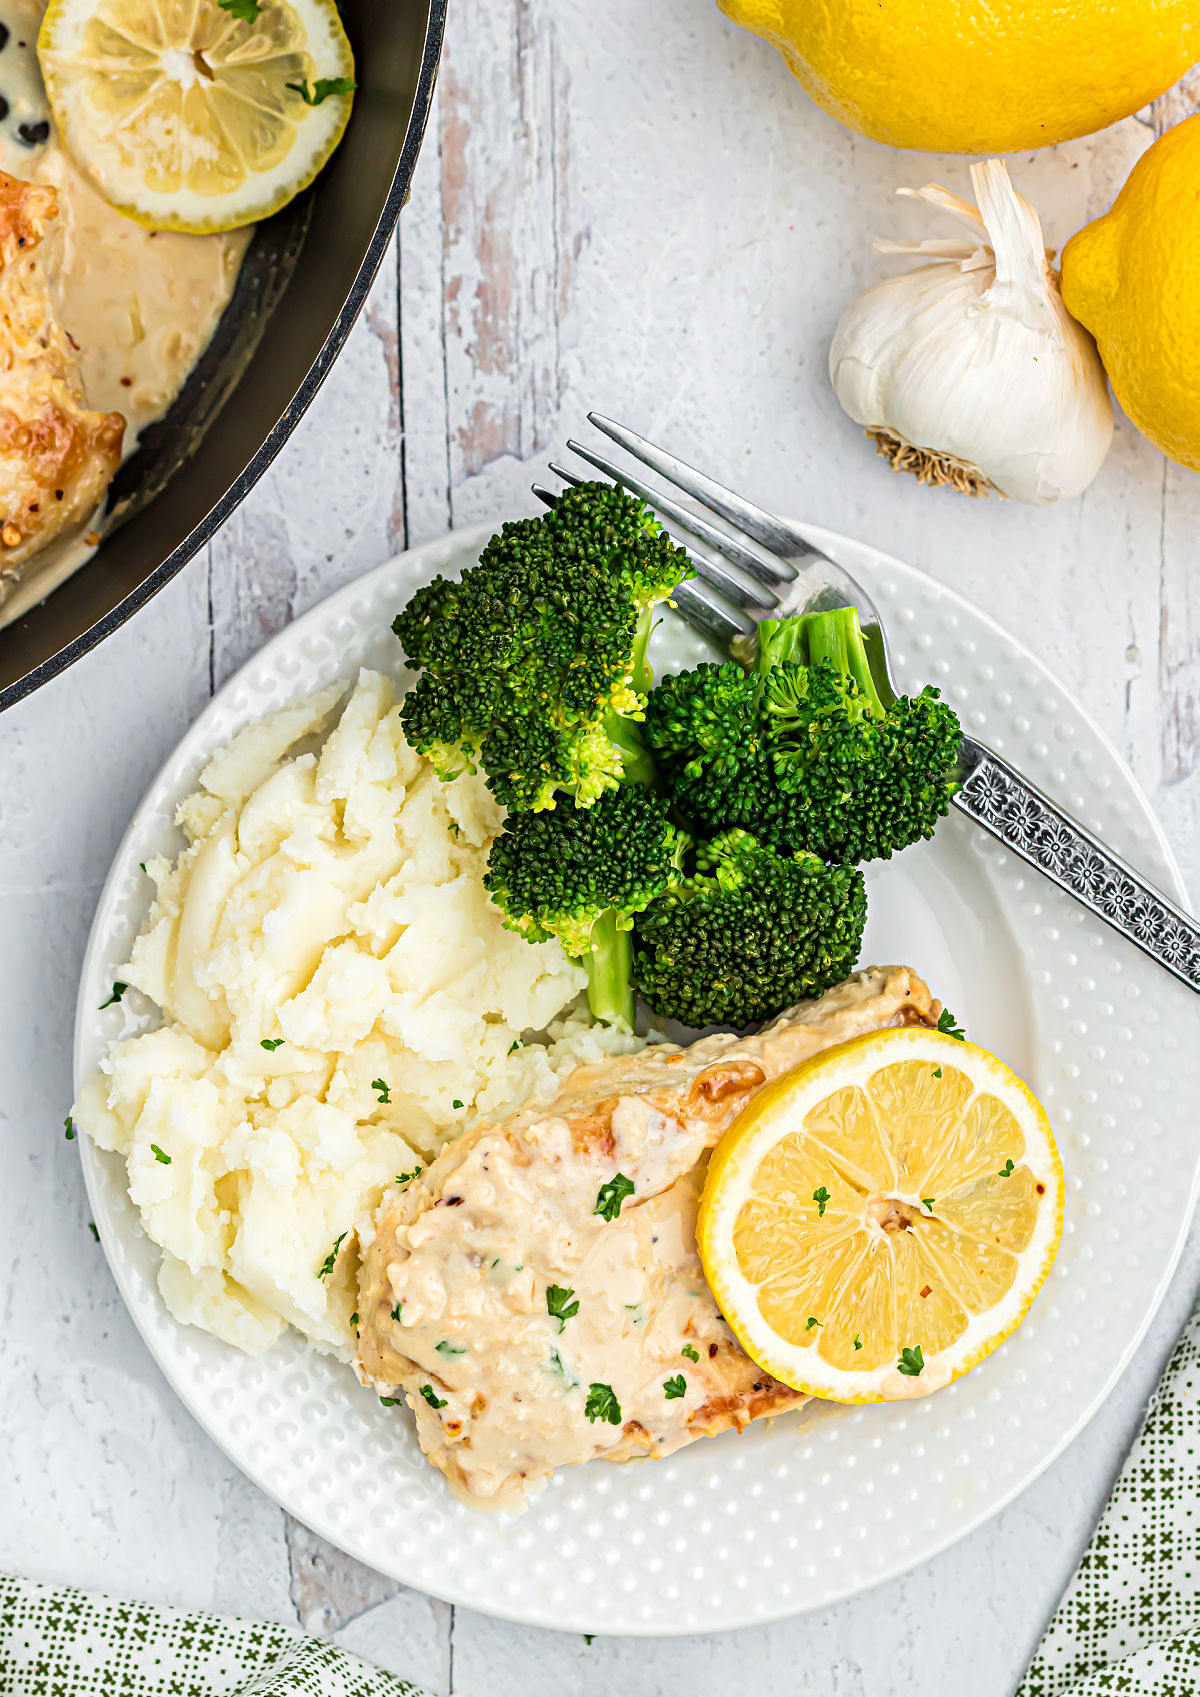 Chicken breast with lemon garlic sauce on a plate with mashed cauliflower and broccoli.